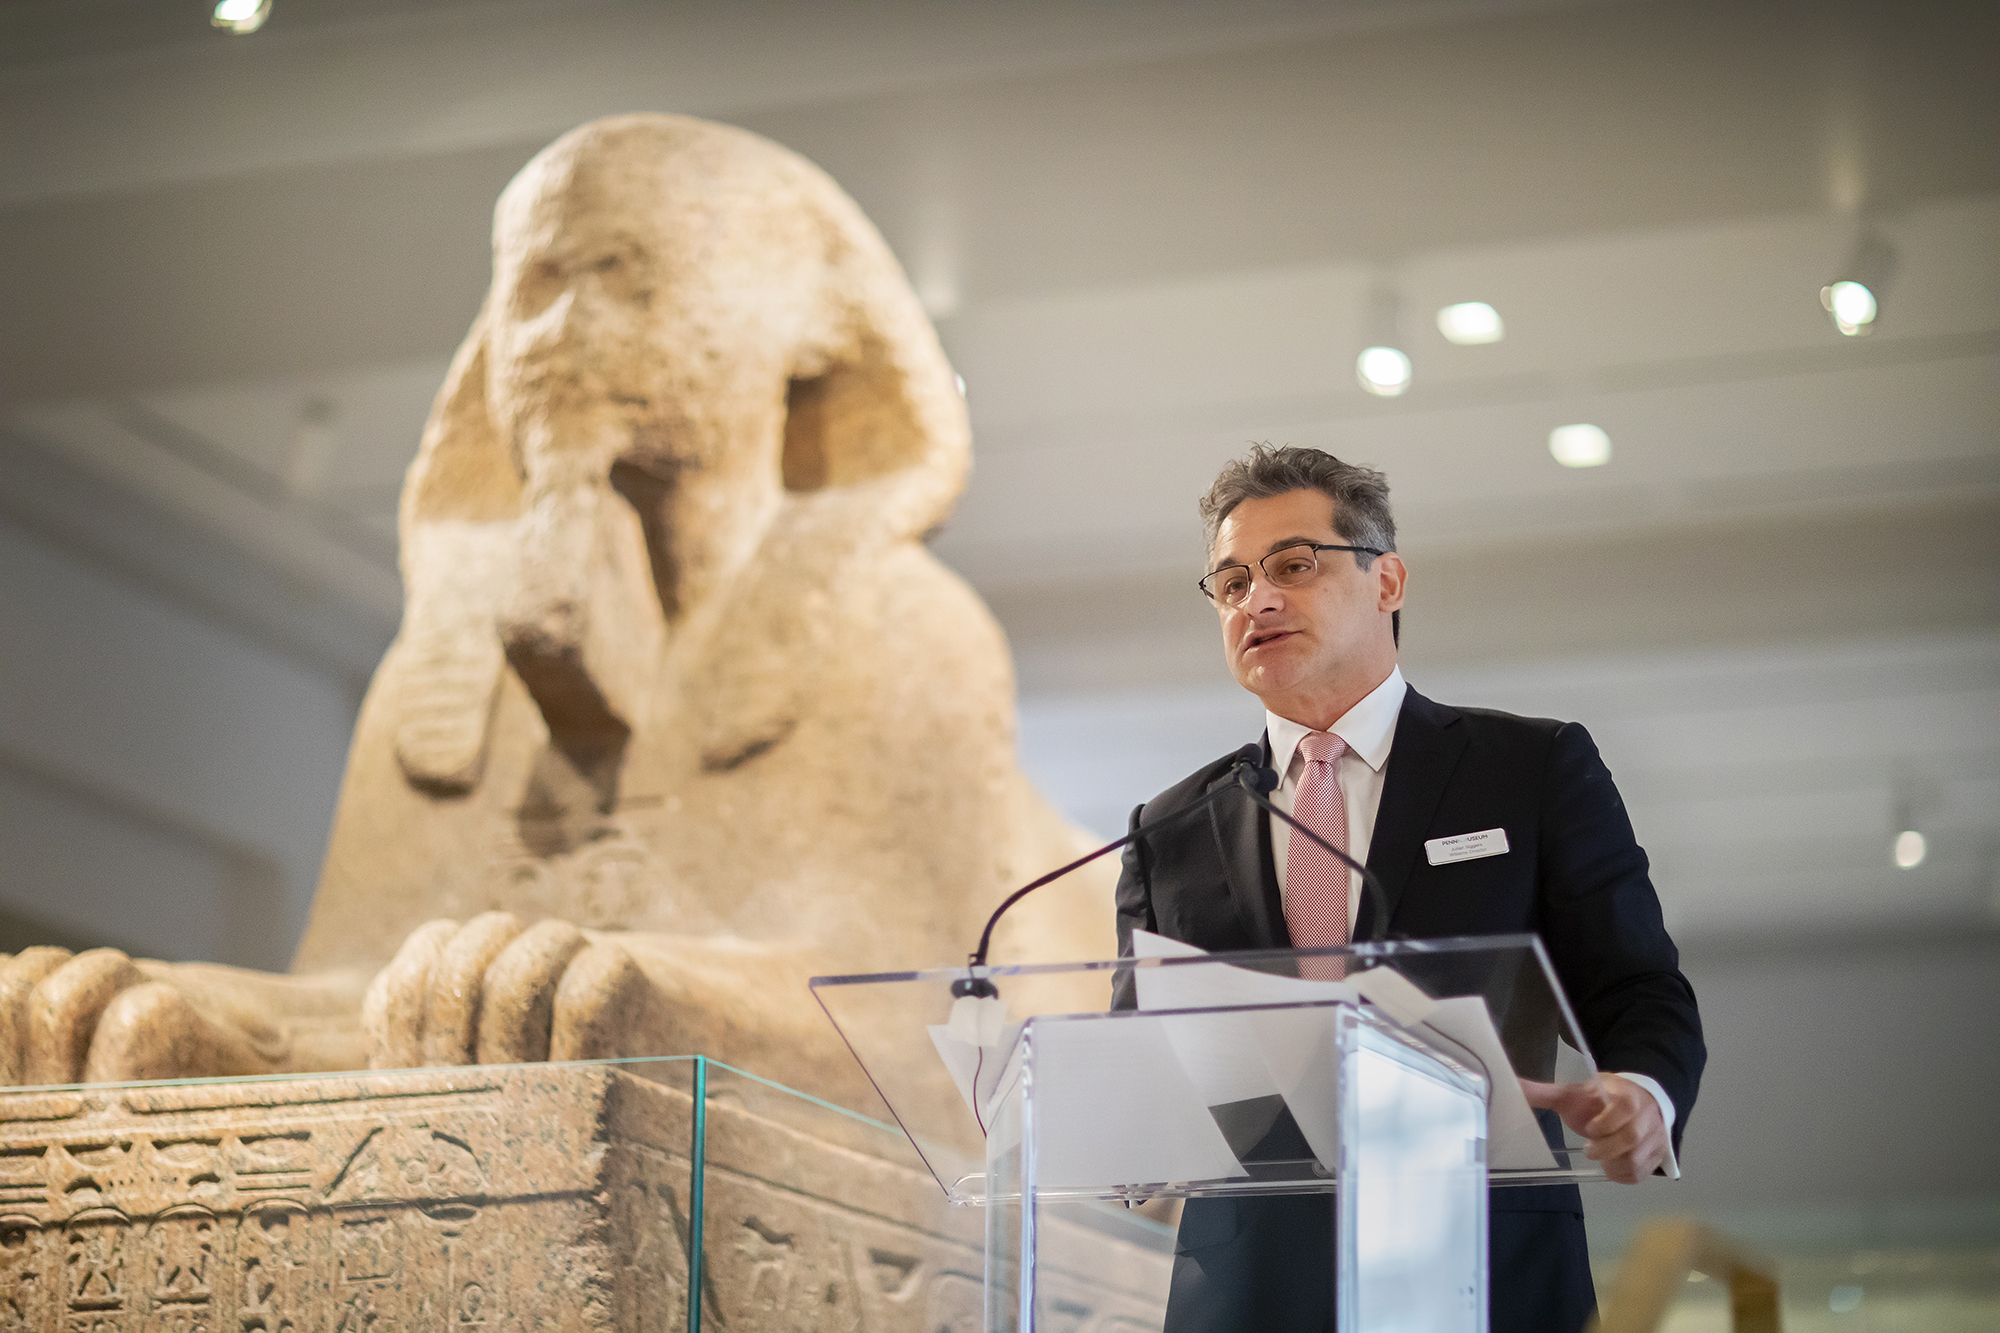 penn museum director julian siggers speaking at a podium with the sphinx behind him